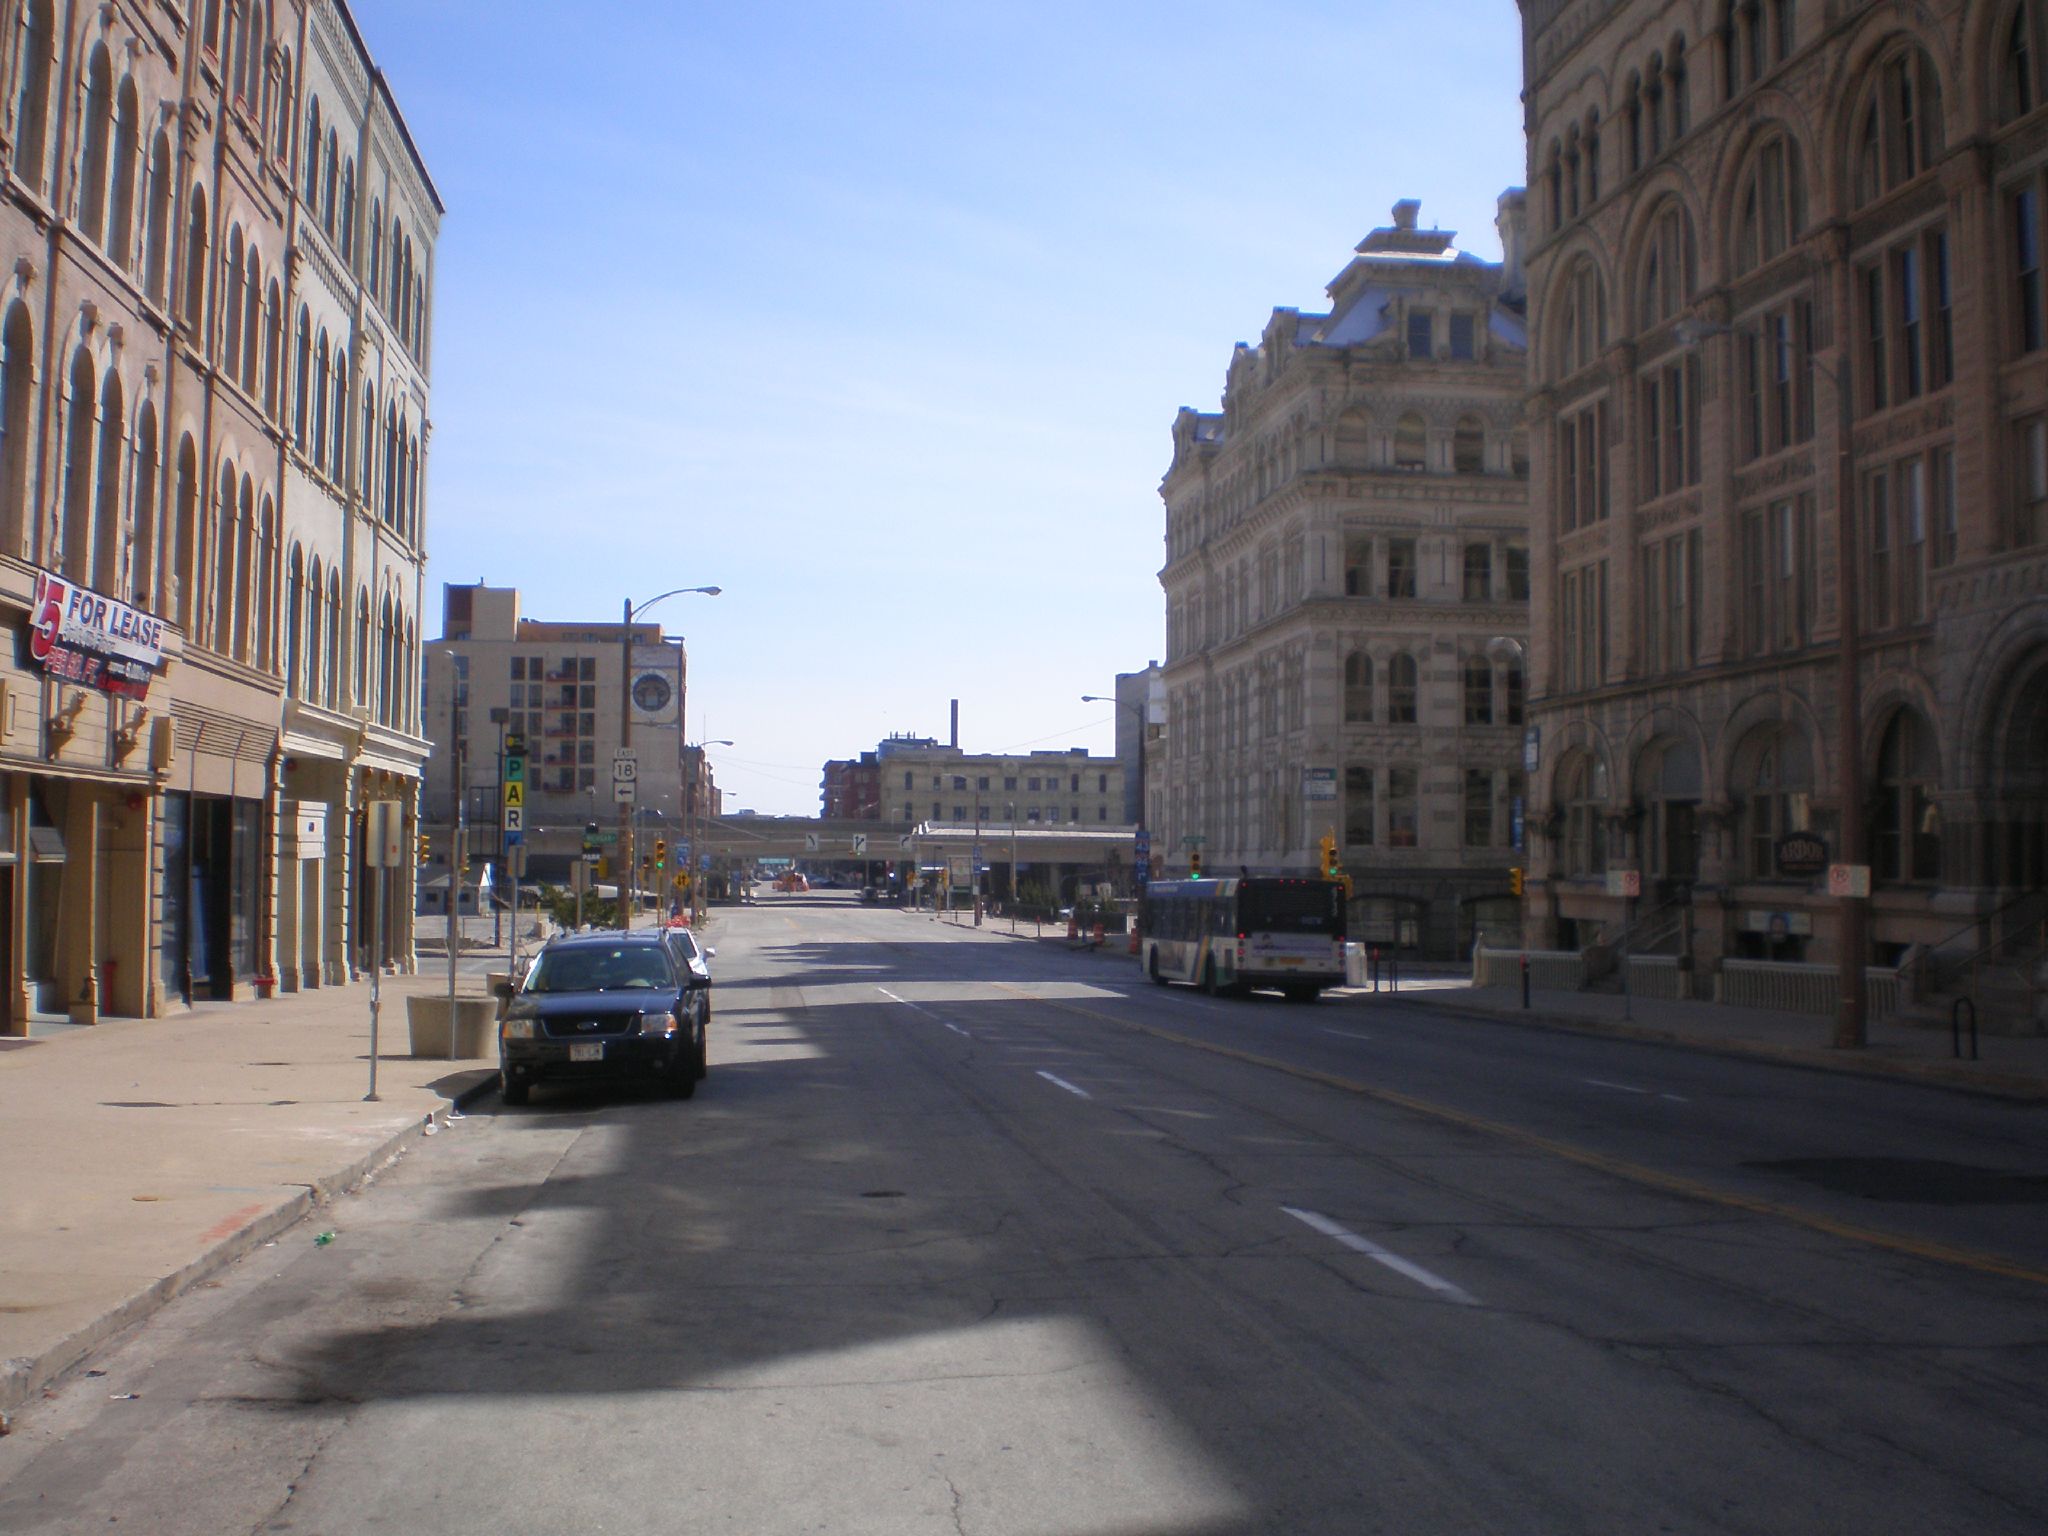 The incubator could be located along this stretch of Broadway.